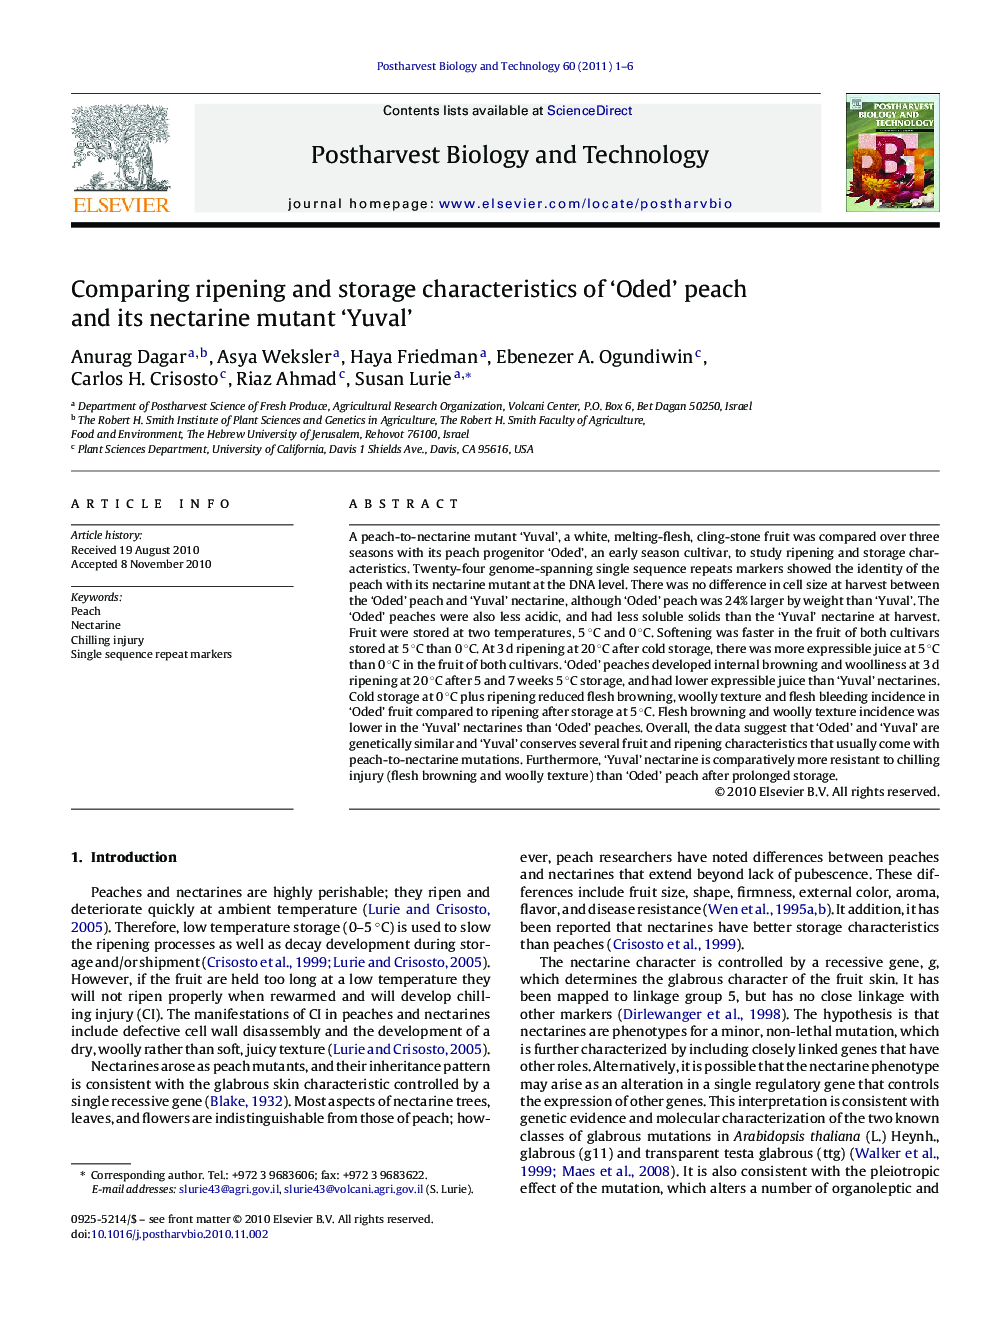 Comparing ripening and storage characteristics of ‘Oded’ peach and its nectarine mutant ‘Yuval’